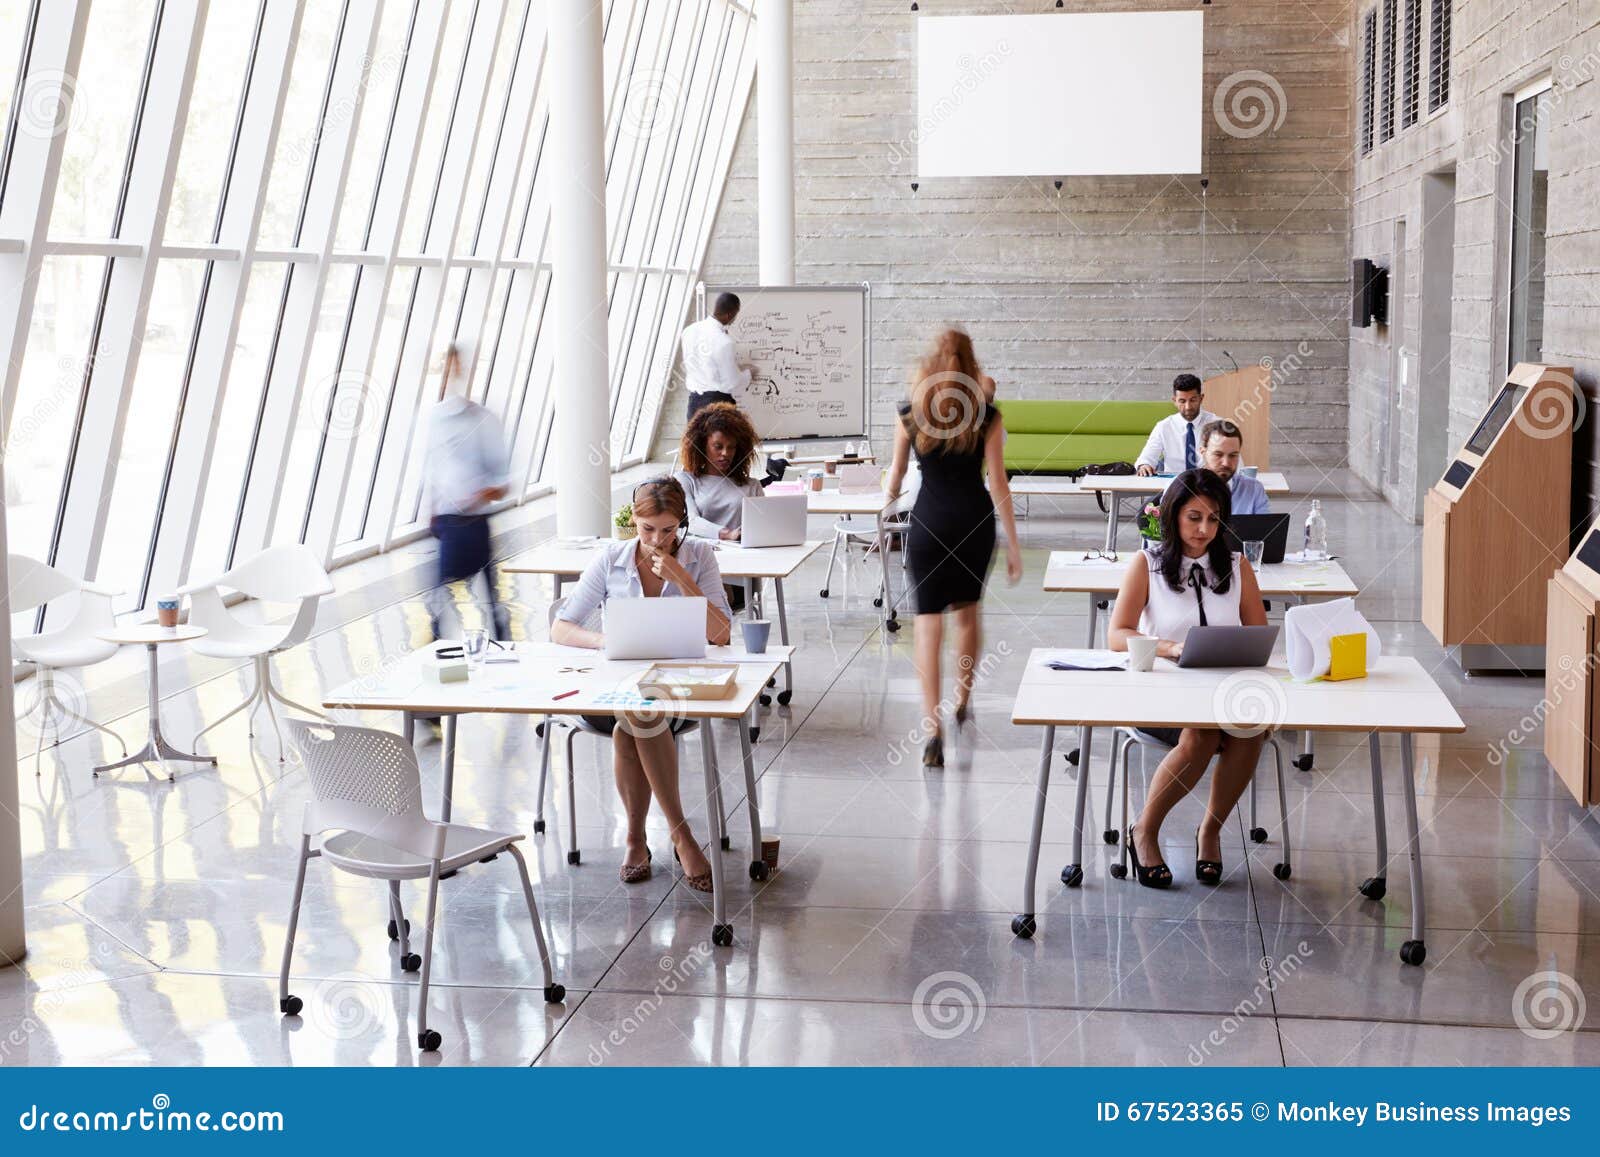 Overhead View of Businesspeople Working at Desks in Office Stock Image -  Image of motion, overhead: 67523365